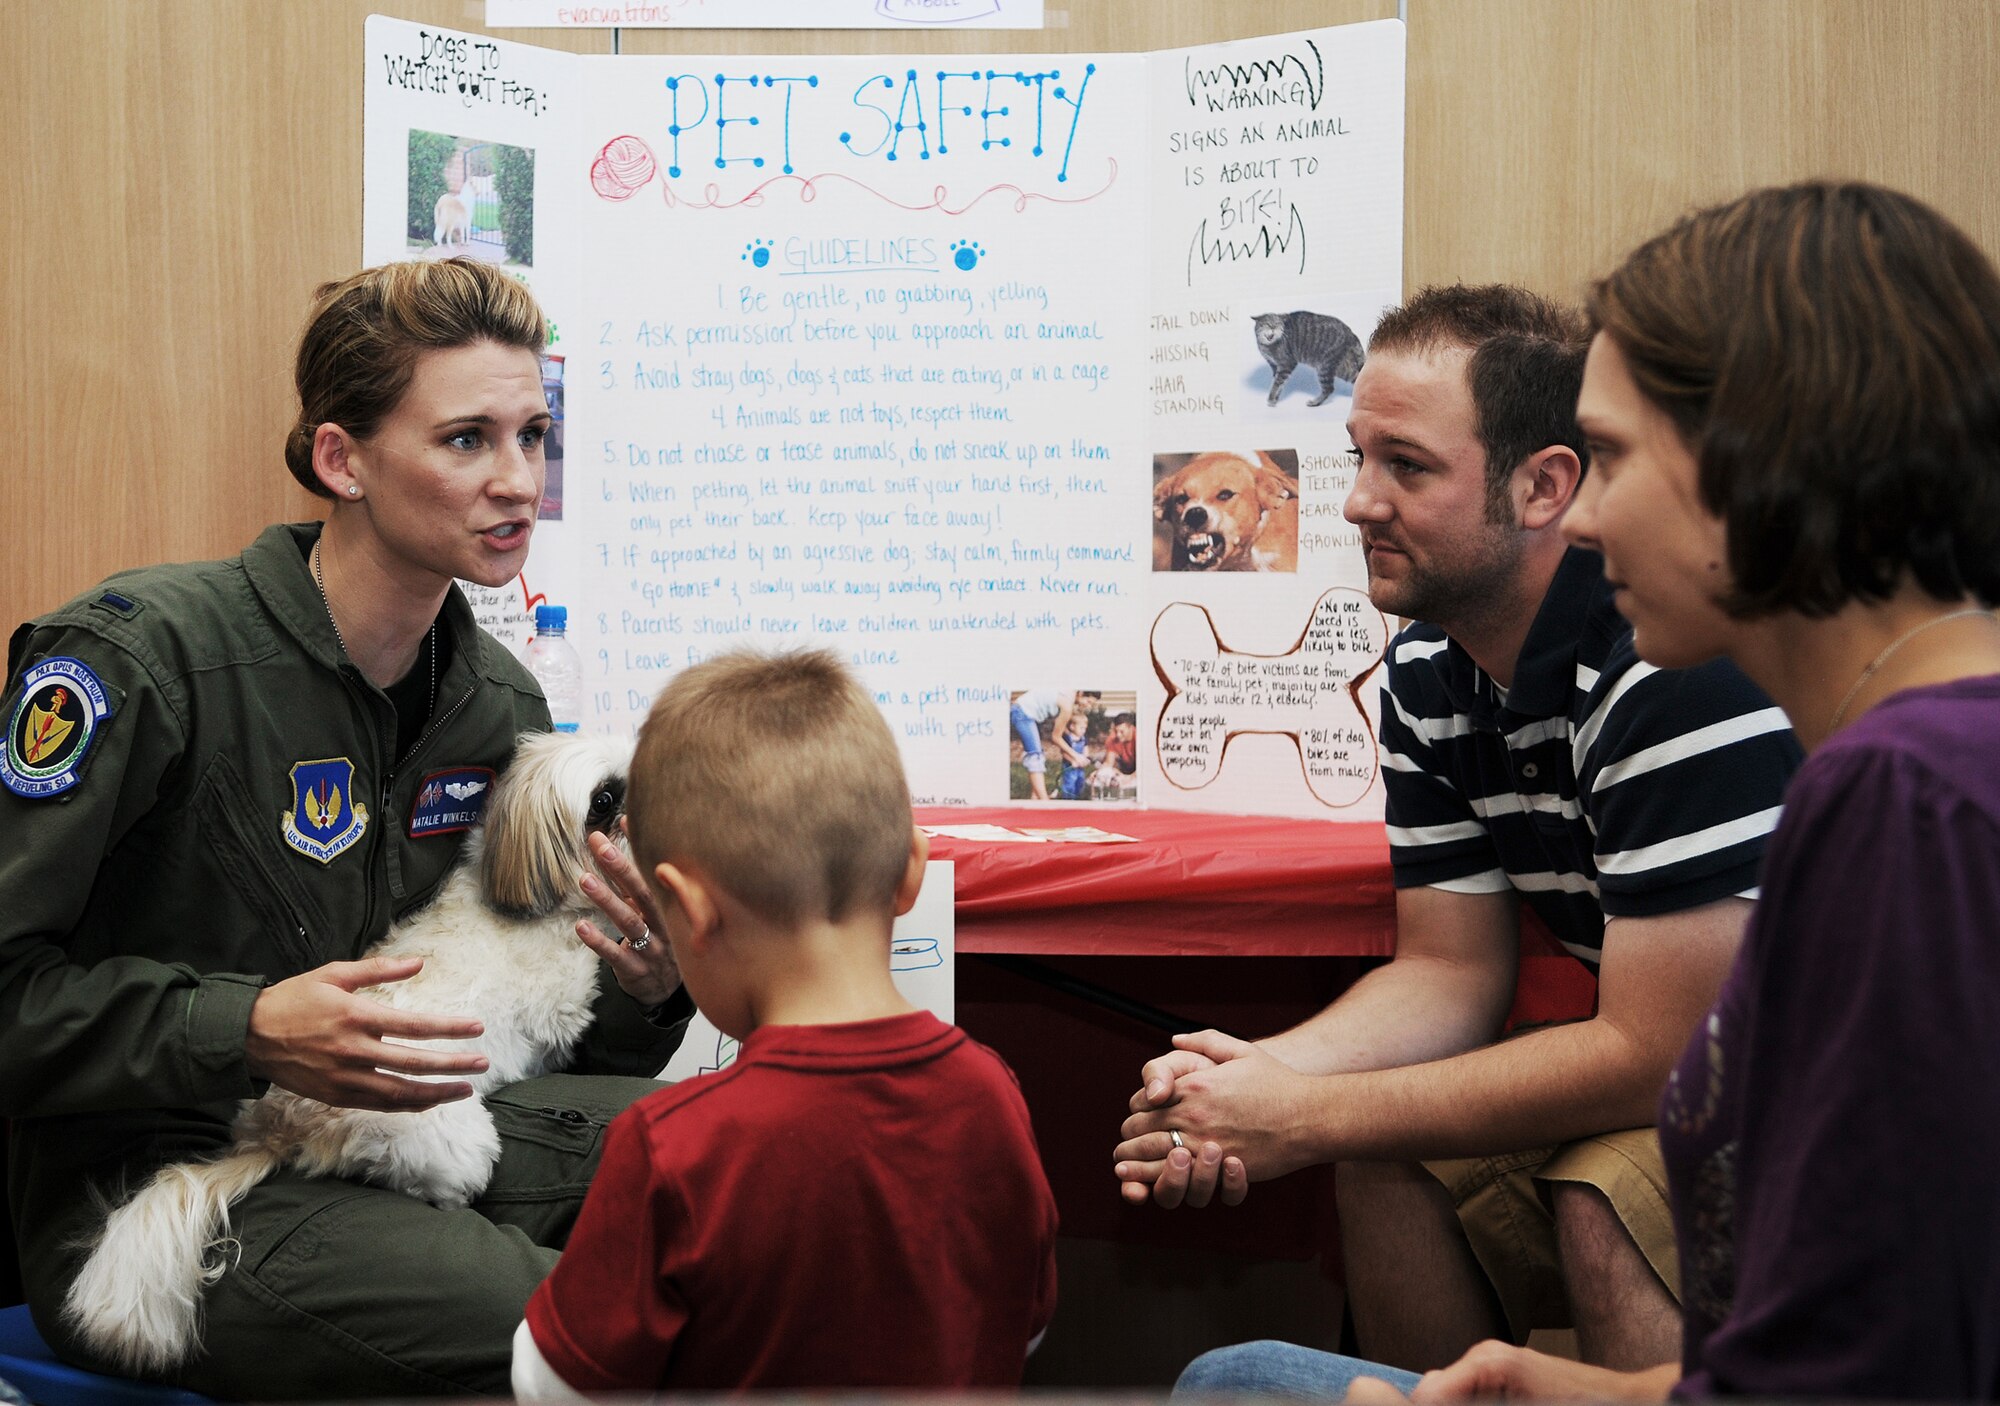 RAF MILDENHALL, England -- First Lt. Natalie Winkels, 351st Air Refueling Squadron (left), and her husband Jon run a pet safety information booth at a Kids' Safety Day event hosted by the American Red Cross Aug. 27 at the Bob Hope Community Center. Becky Barner, military spouse, has lived at Mildenhall for a week and visited the fair with her sons Jacob, 2, and Luke, 1 (not pictured). The safety day covered items such as fire safety, first aid kits and blood safety. (U.S. Air Force photo/Senior Airman Thomas Trower)